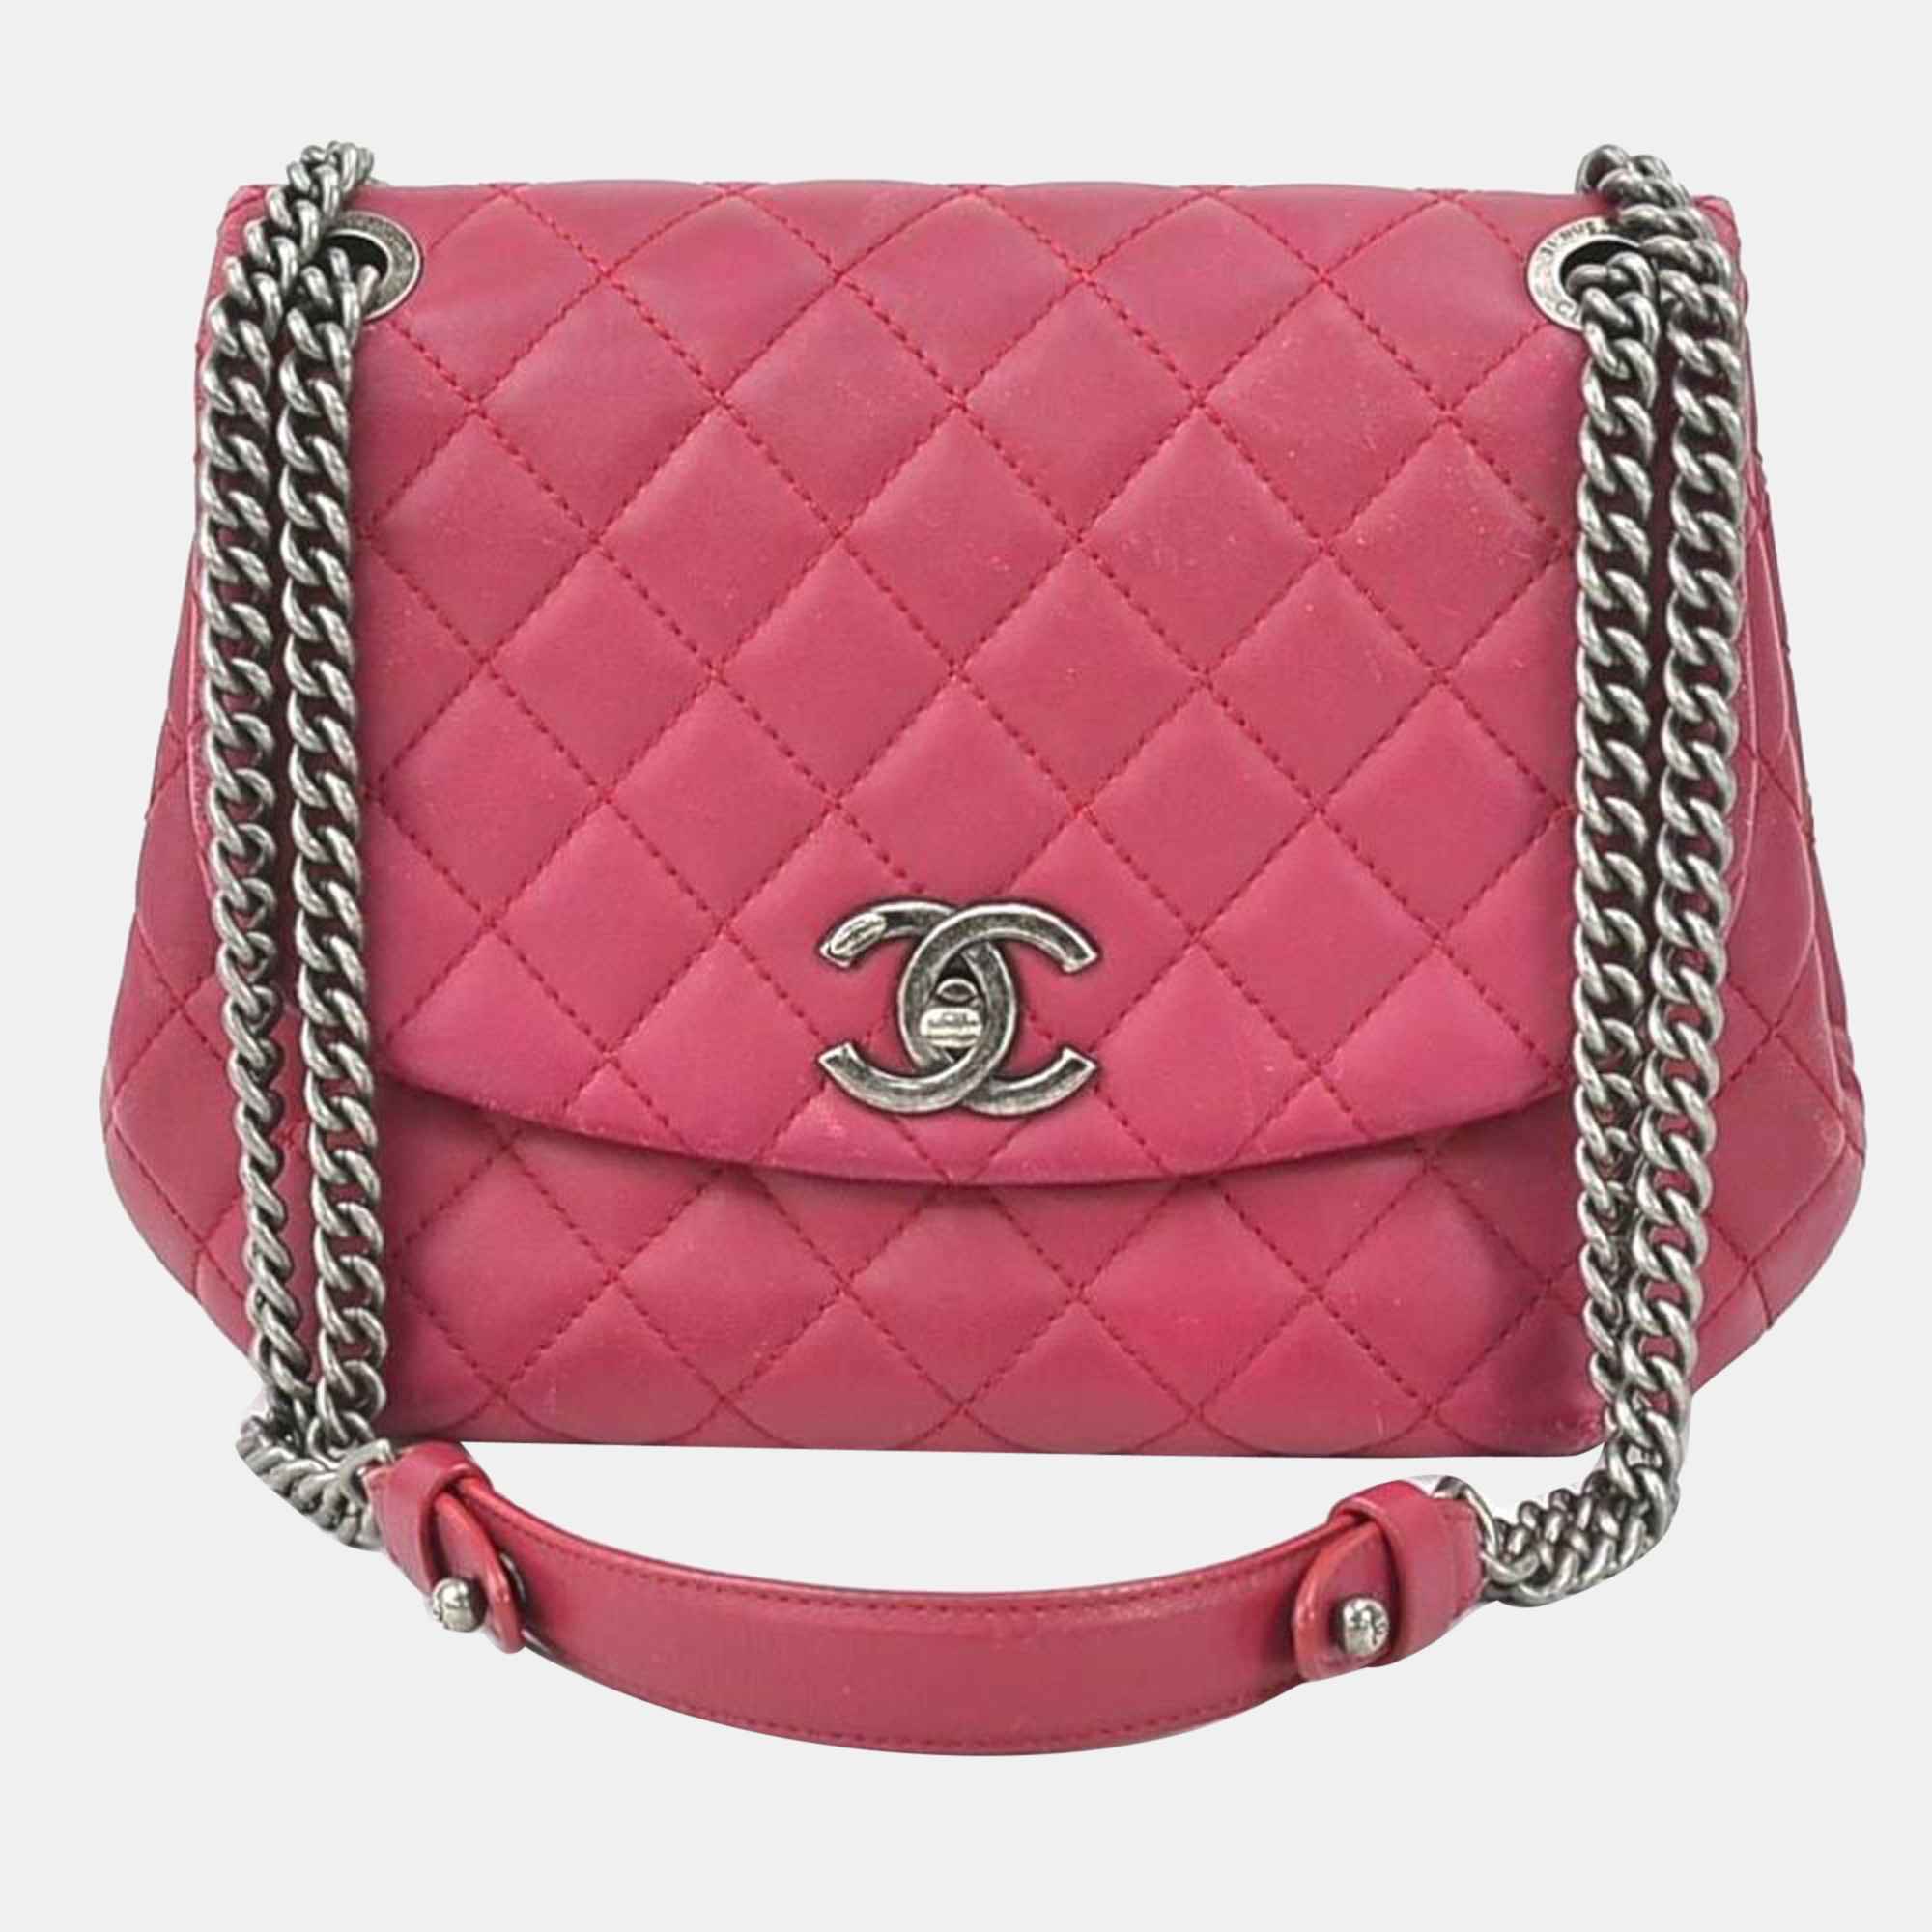 Chanel pink quilted leather diagonal crossbody bag